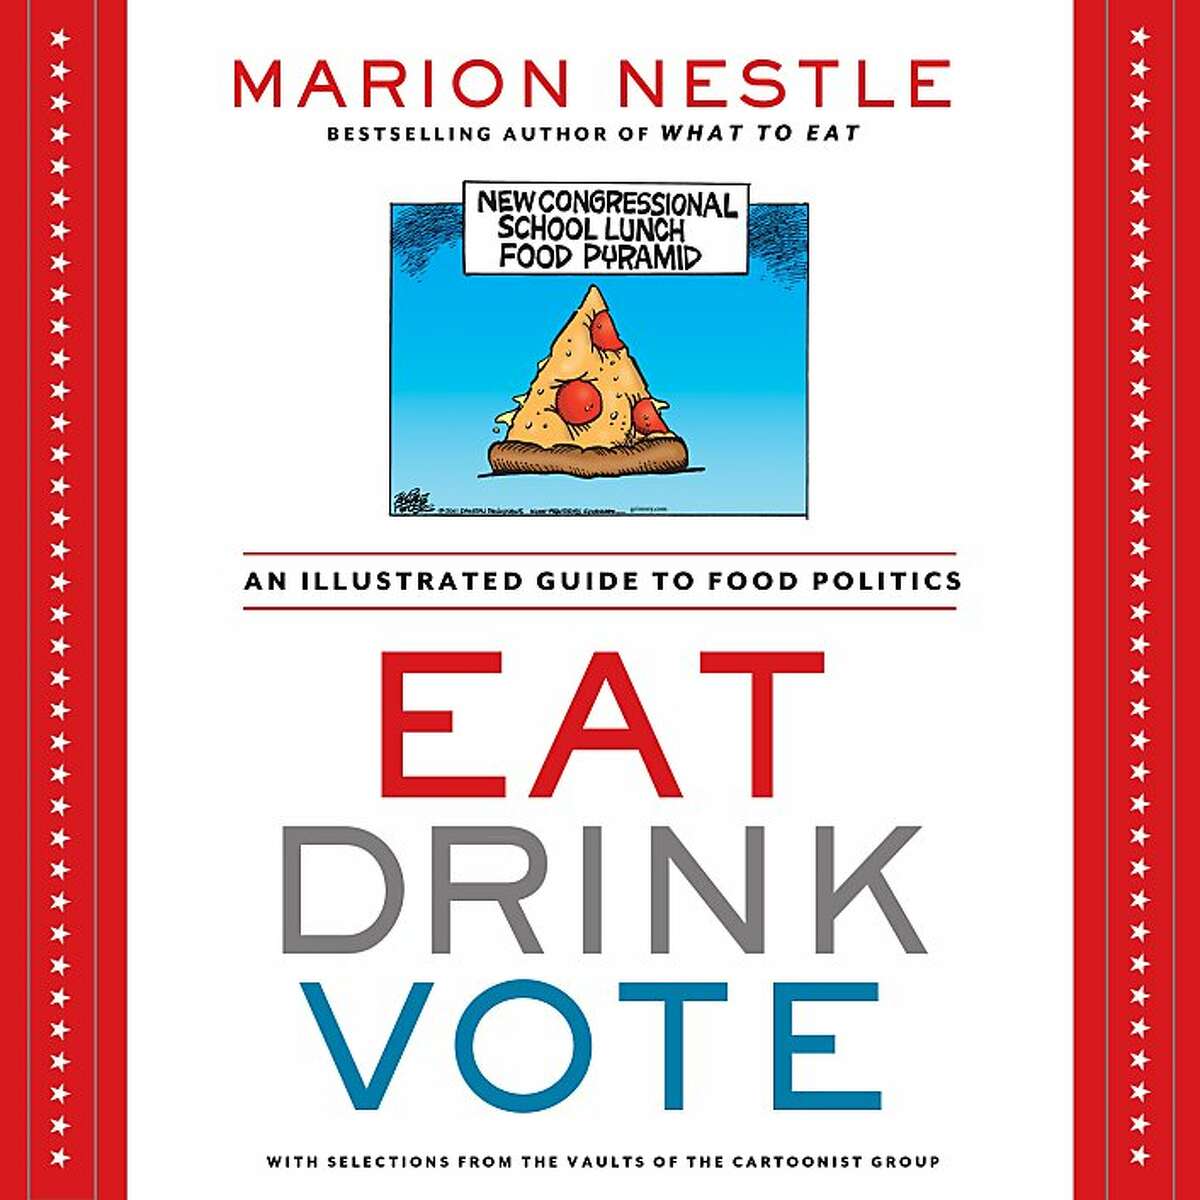 "Eat Drink Vote," by Chronicle contributor Marion Nestle. Publishes Sept. 3, 2013